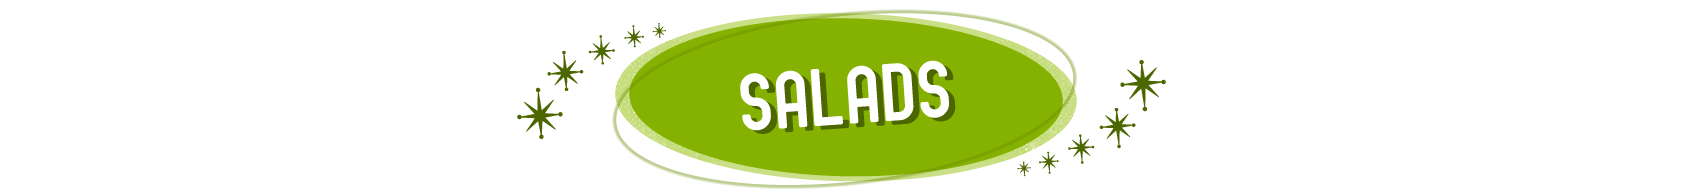 title text Salads with a green oval behind it